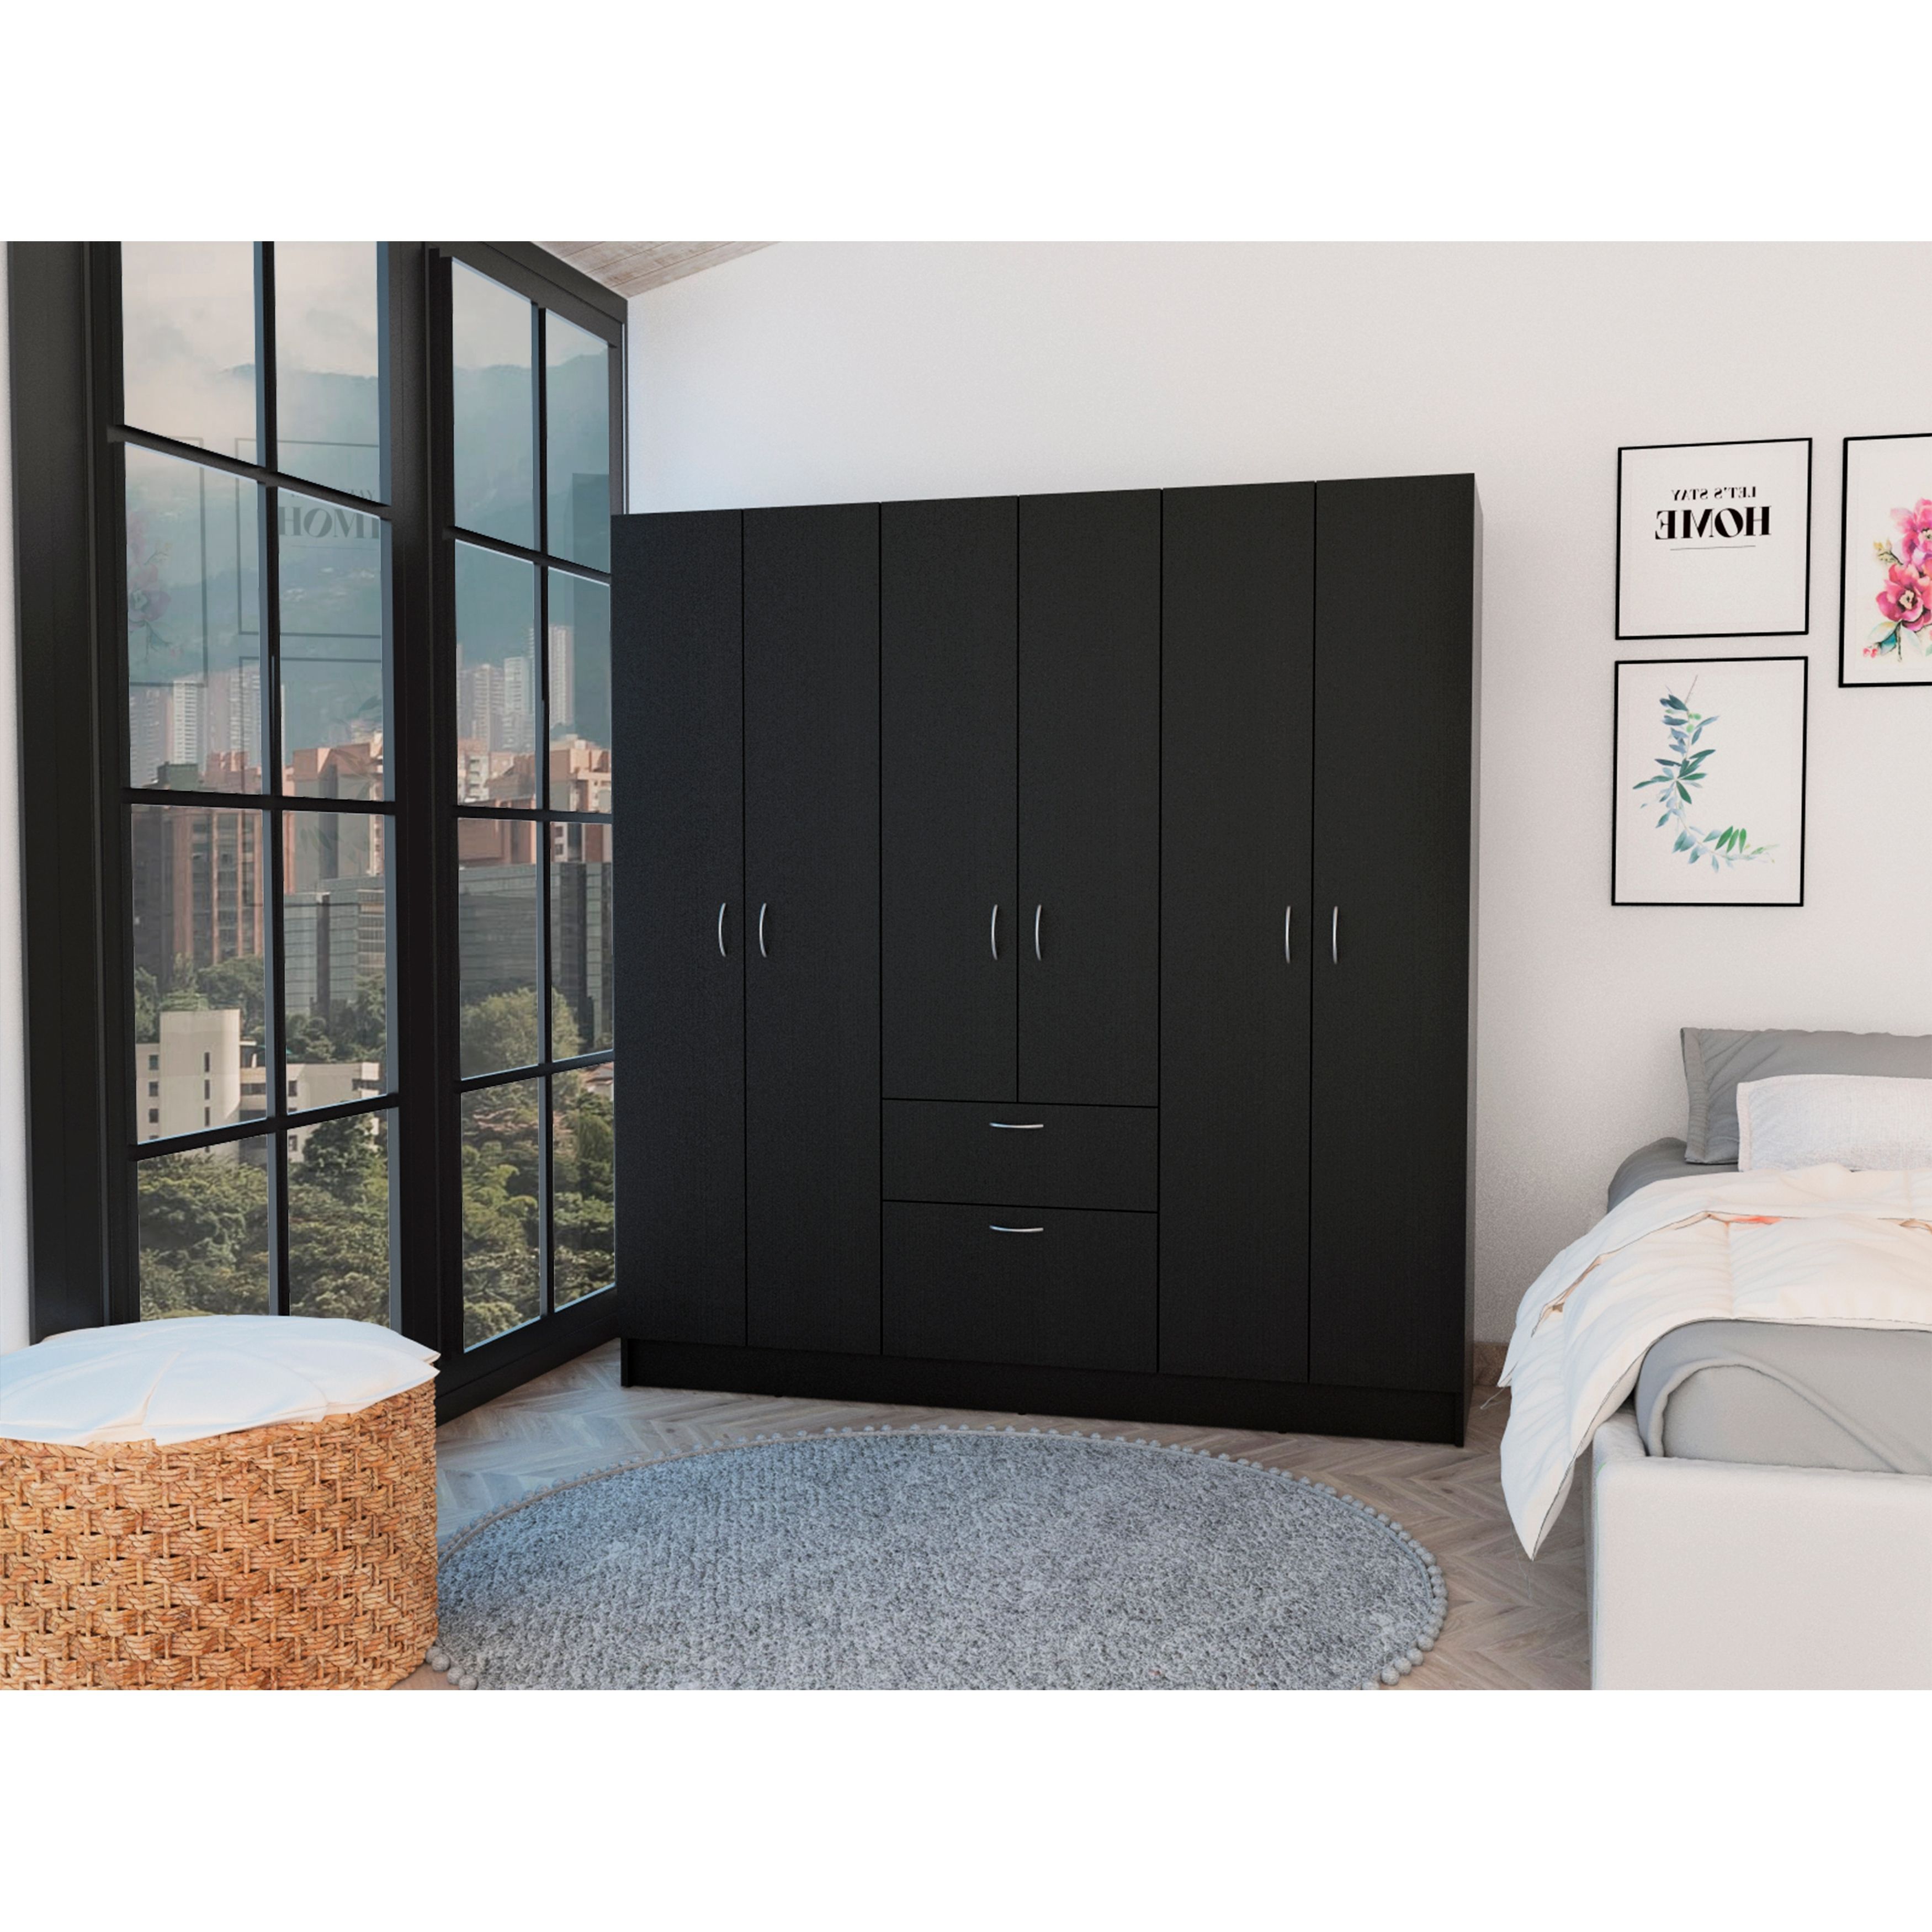 6 Door 1 Drawer Wardrobe Closet With Drawers & Shelves, Armoire Wardrobe  Closet With Hanging Rod, Bedroom Armoire Closet – Bed Bath & Beyond –  37828084 Pertaining To 6 Door Wardrobes Bedroom Furniture (View 16 of 20)